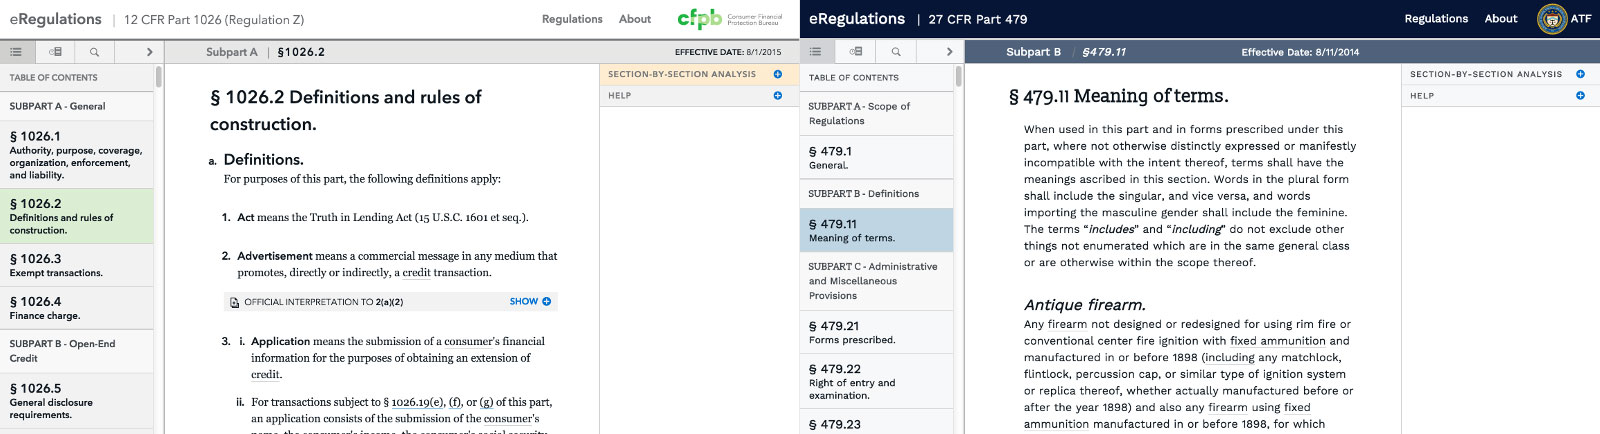 A comparison of CFPB's eRegs and ATF's eRegs